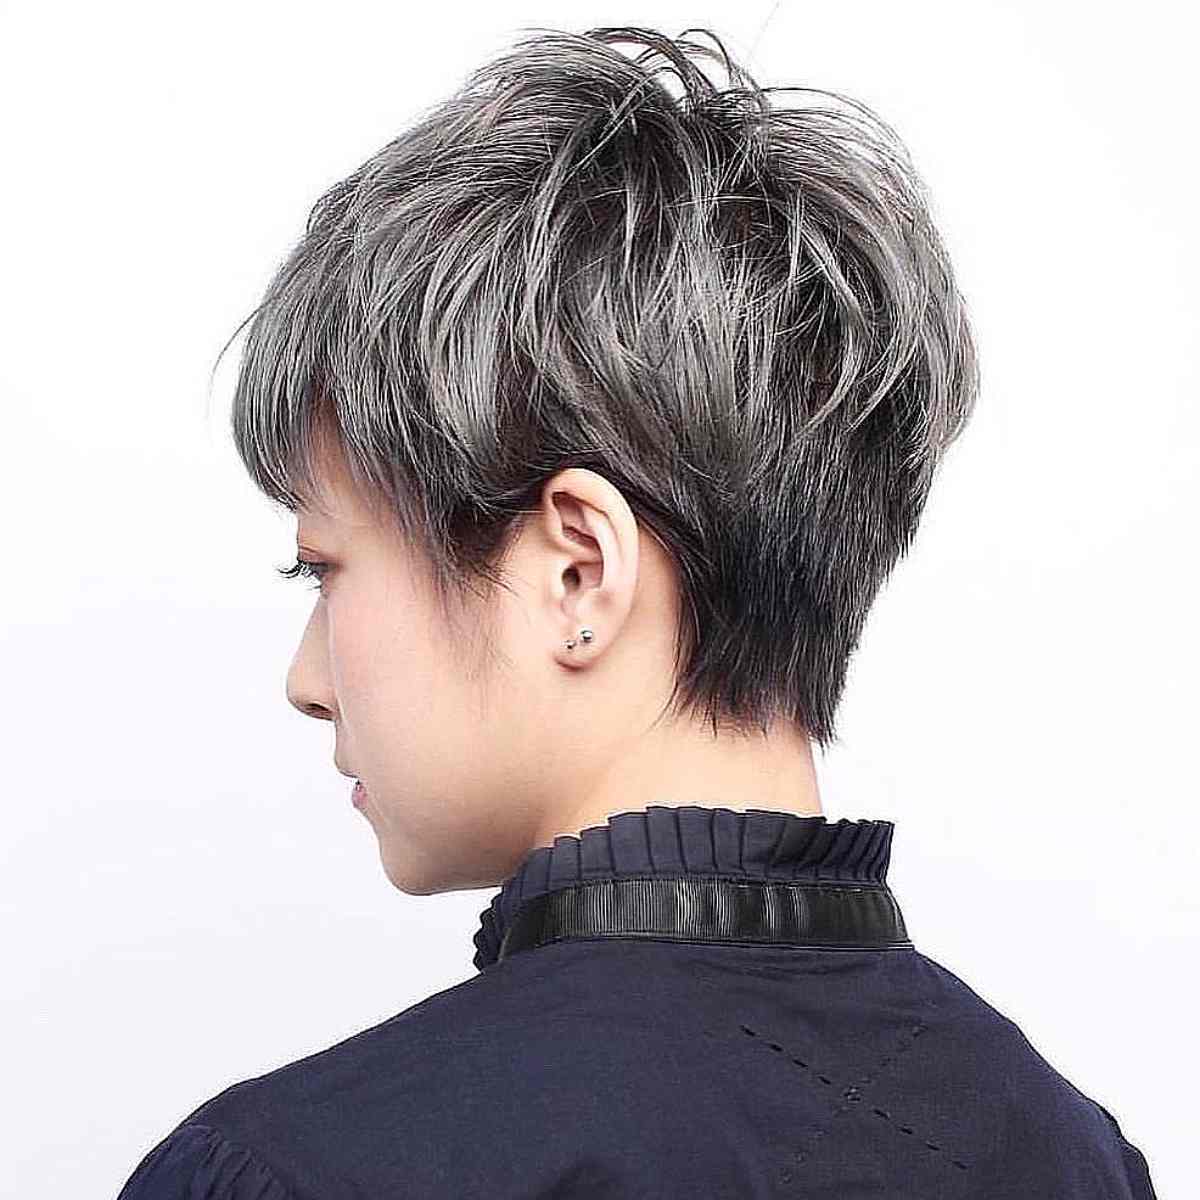 Edgy Spiky Pixie Cut with Piece-y Layers